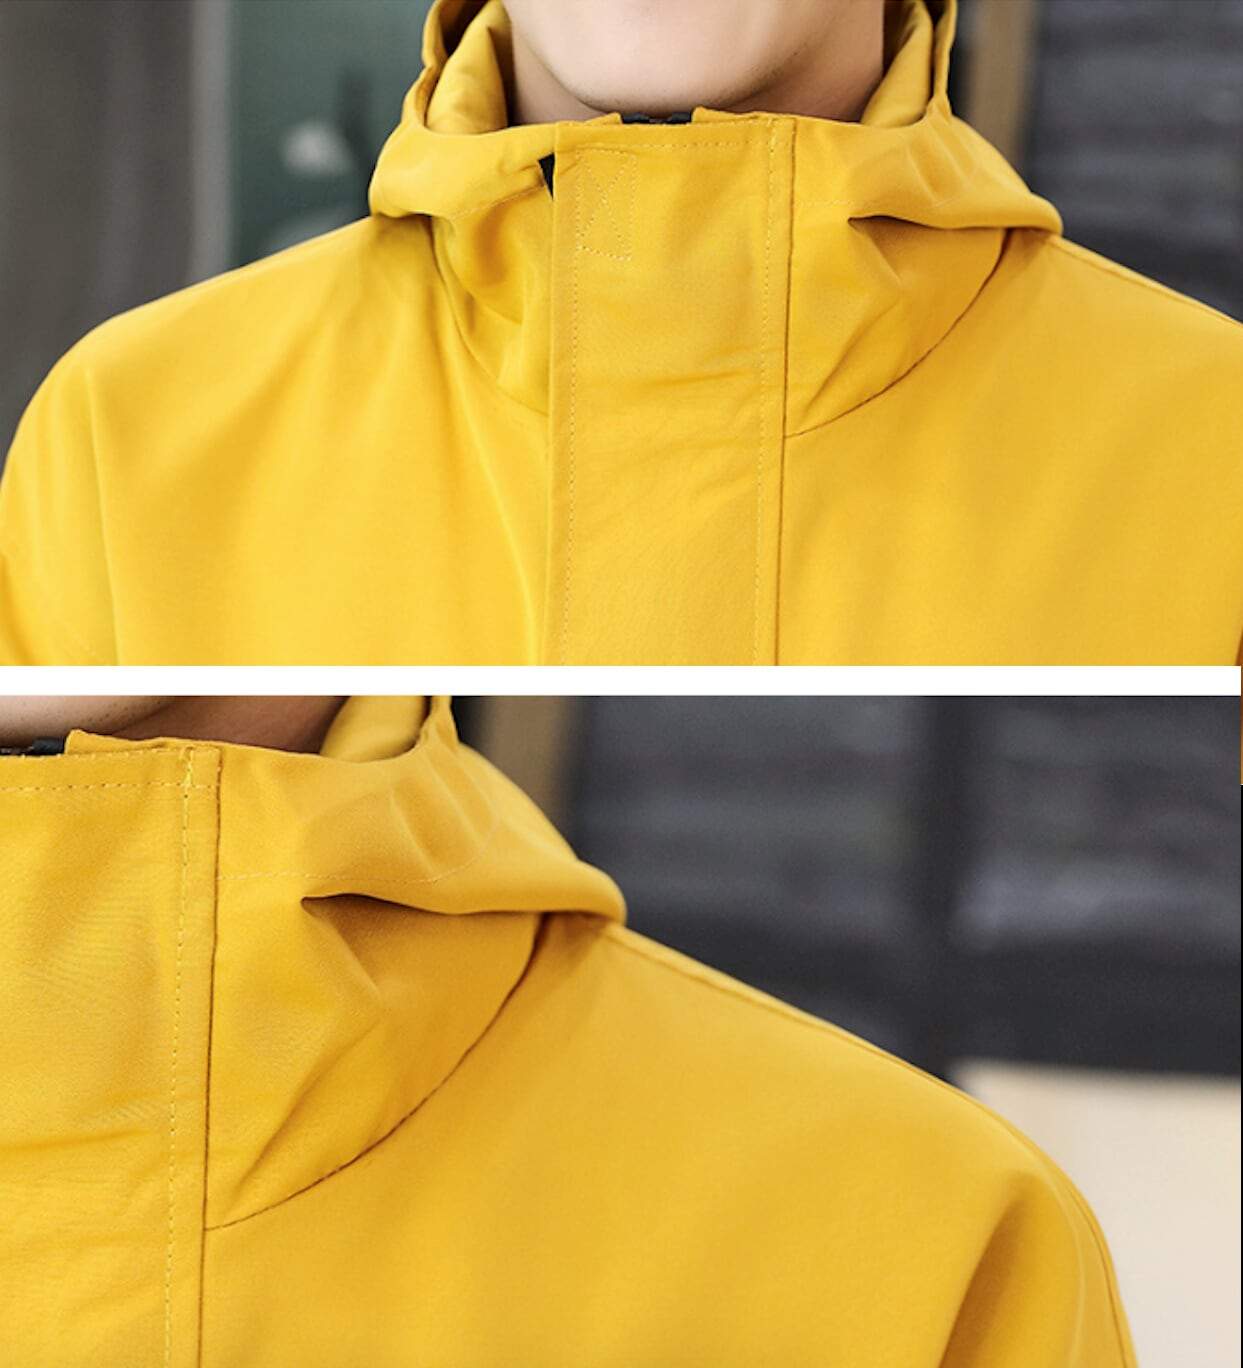 mens yellow polyester/cotton blend hooded zip up street style jacket